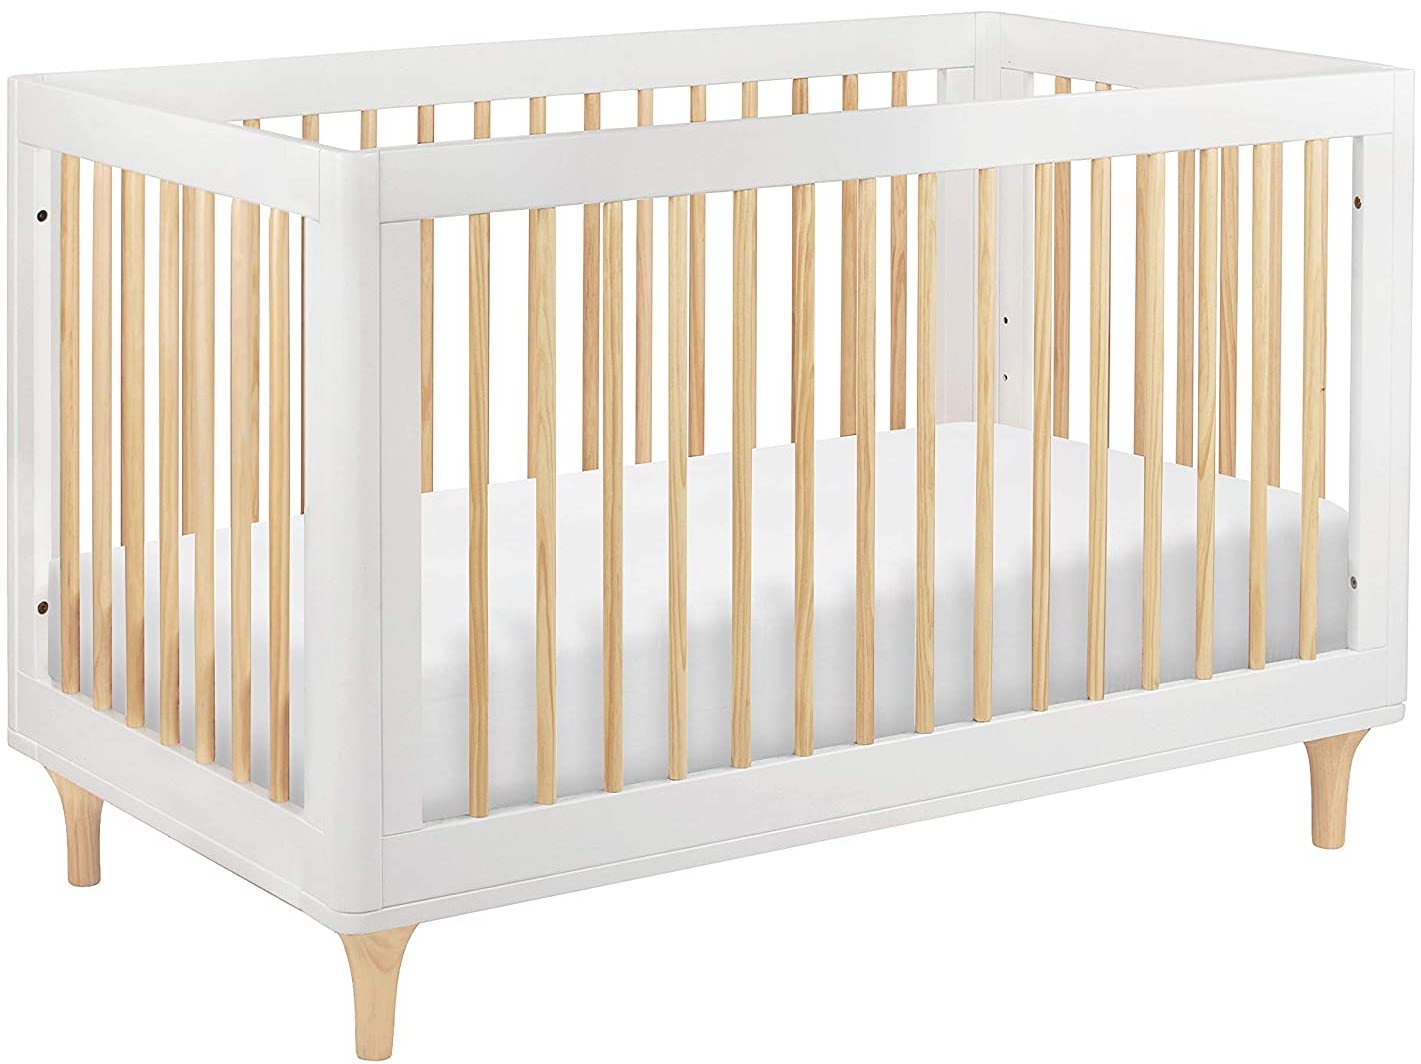 Babyletto Lolly 3-in-1 Convertible Crib — includes bed conversion Kit for toddlers